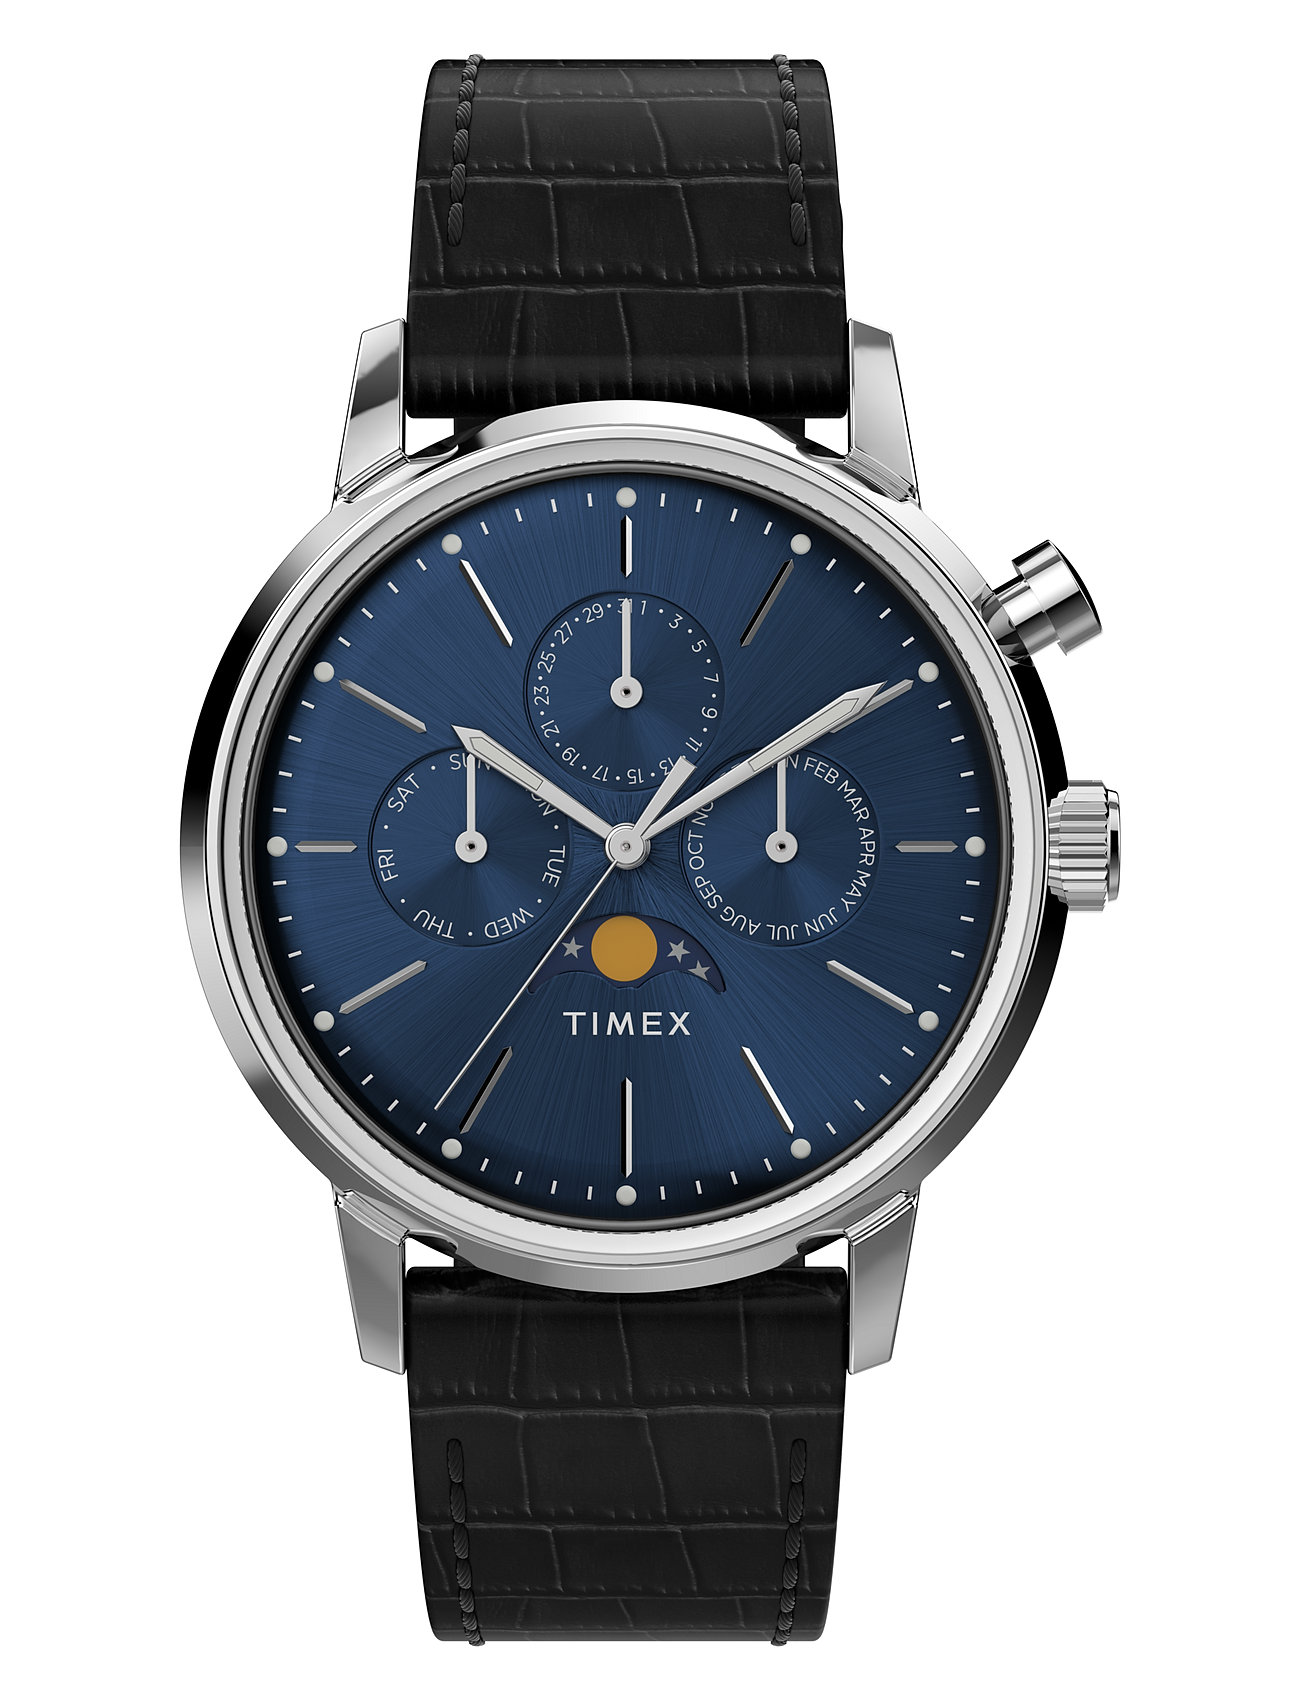 Marlin Quartz Moon Phase 40Mm Sst Case Blue Dial Black Leather Strap Accessories Watches Analog Watches Black Timex